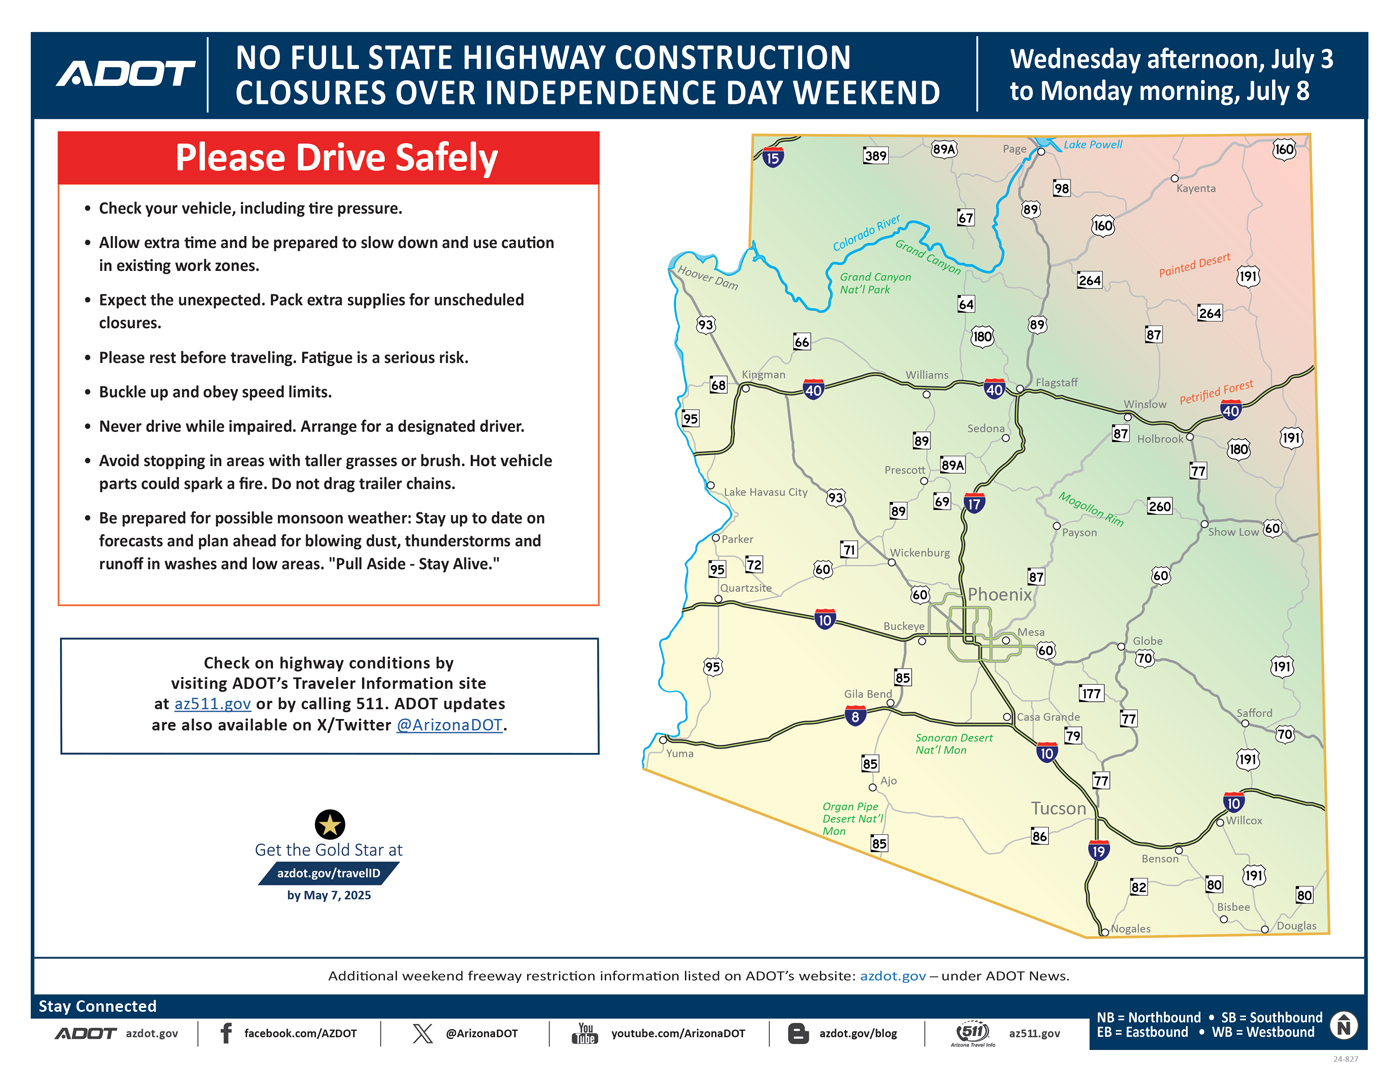 ADOT's Weekend Freeway Travel Advisory Map (July 4 Weekend) No Closures Scheduled